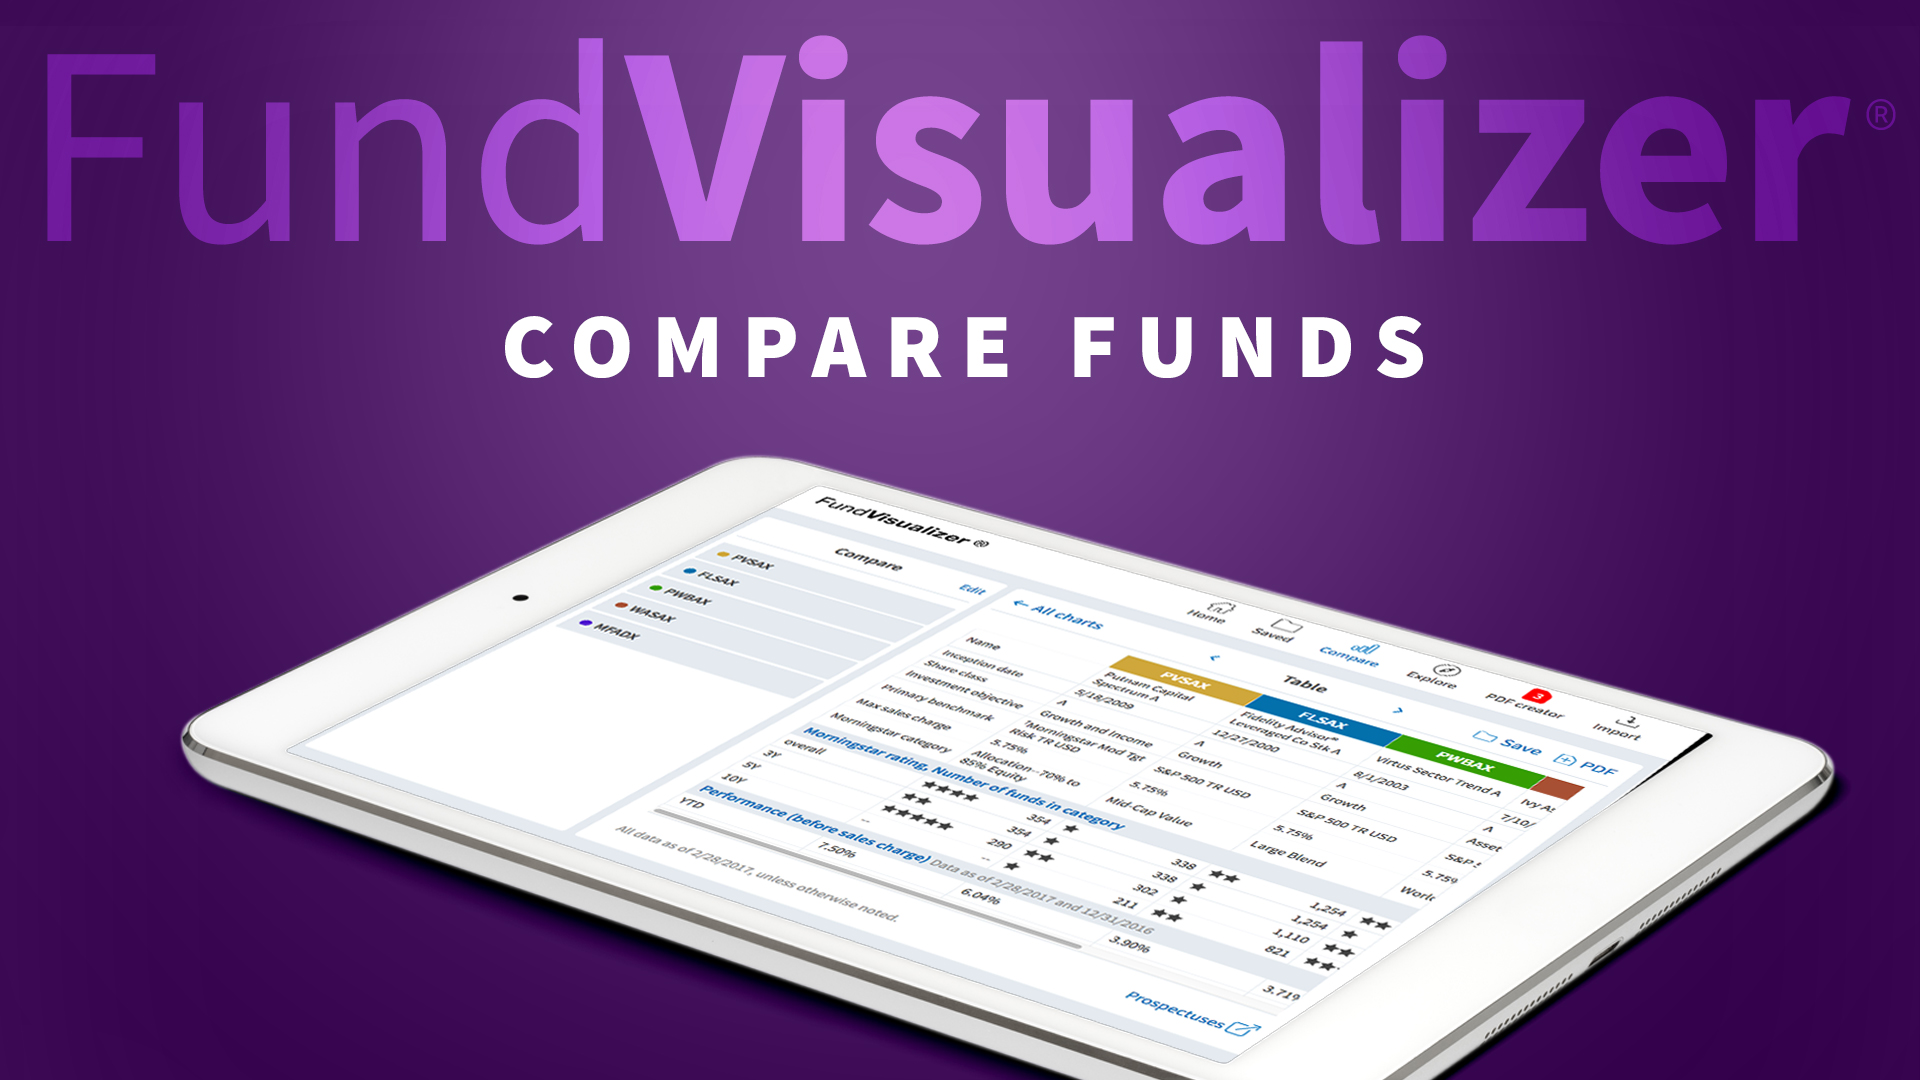 Fund and portfolio analysis for free, anytime, anywhere featured image